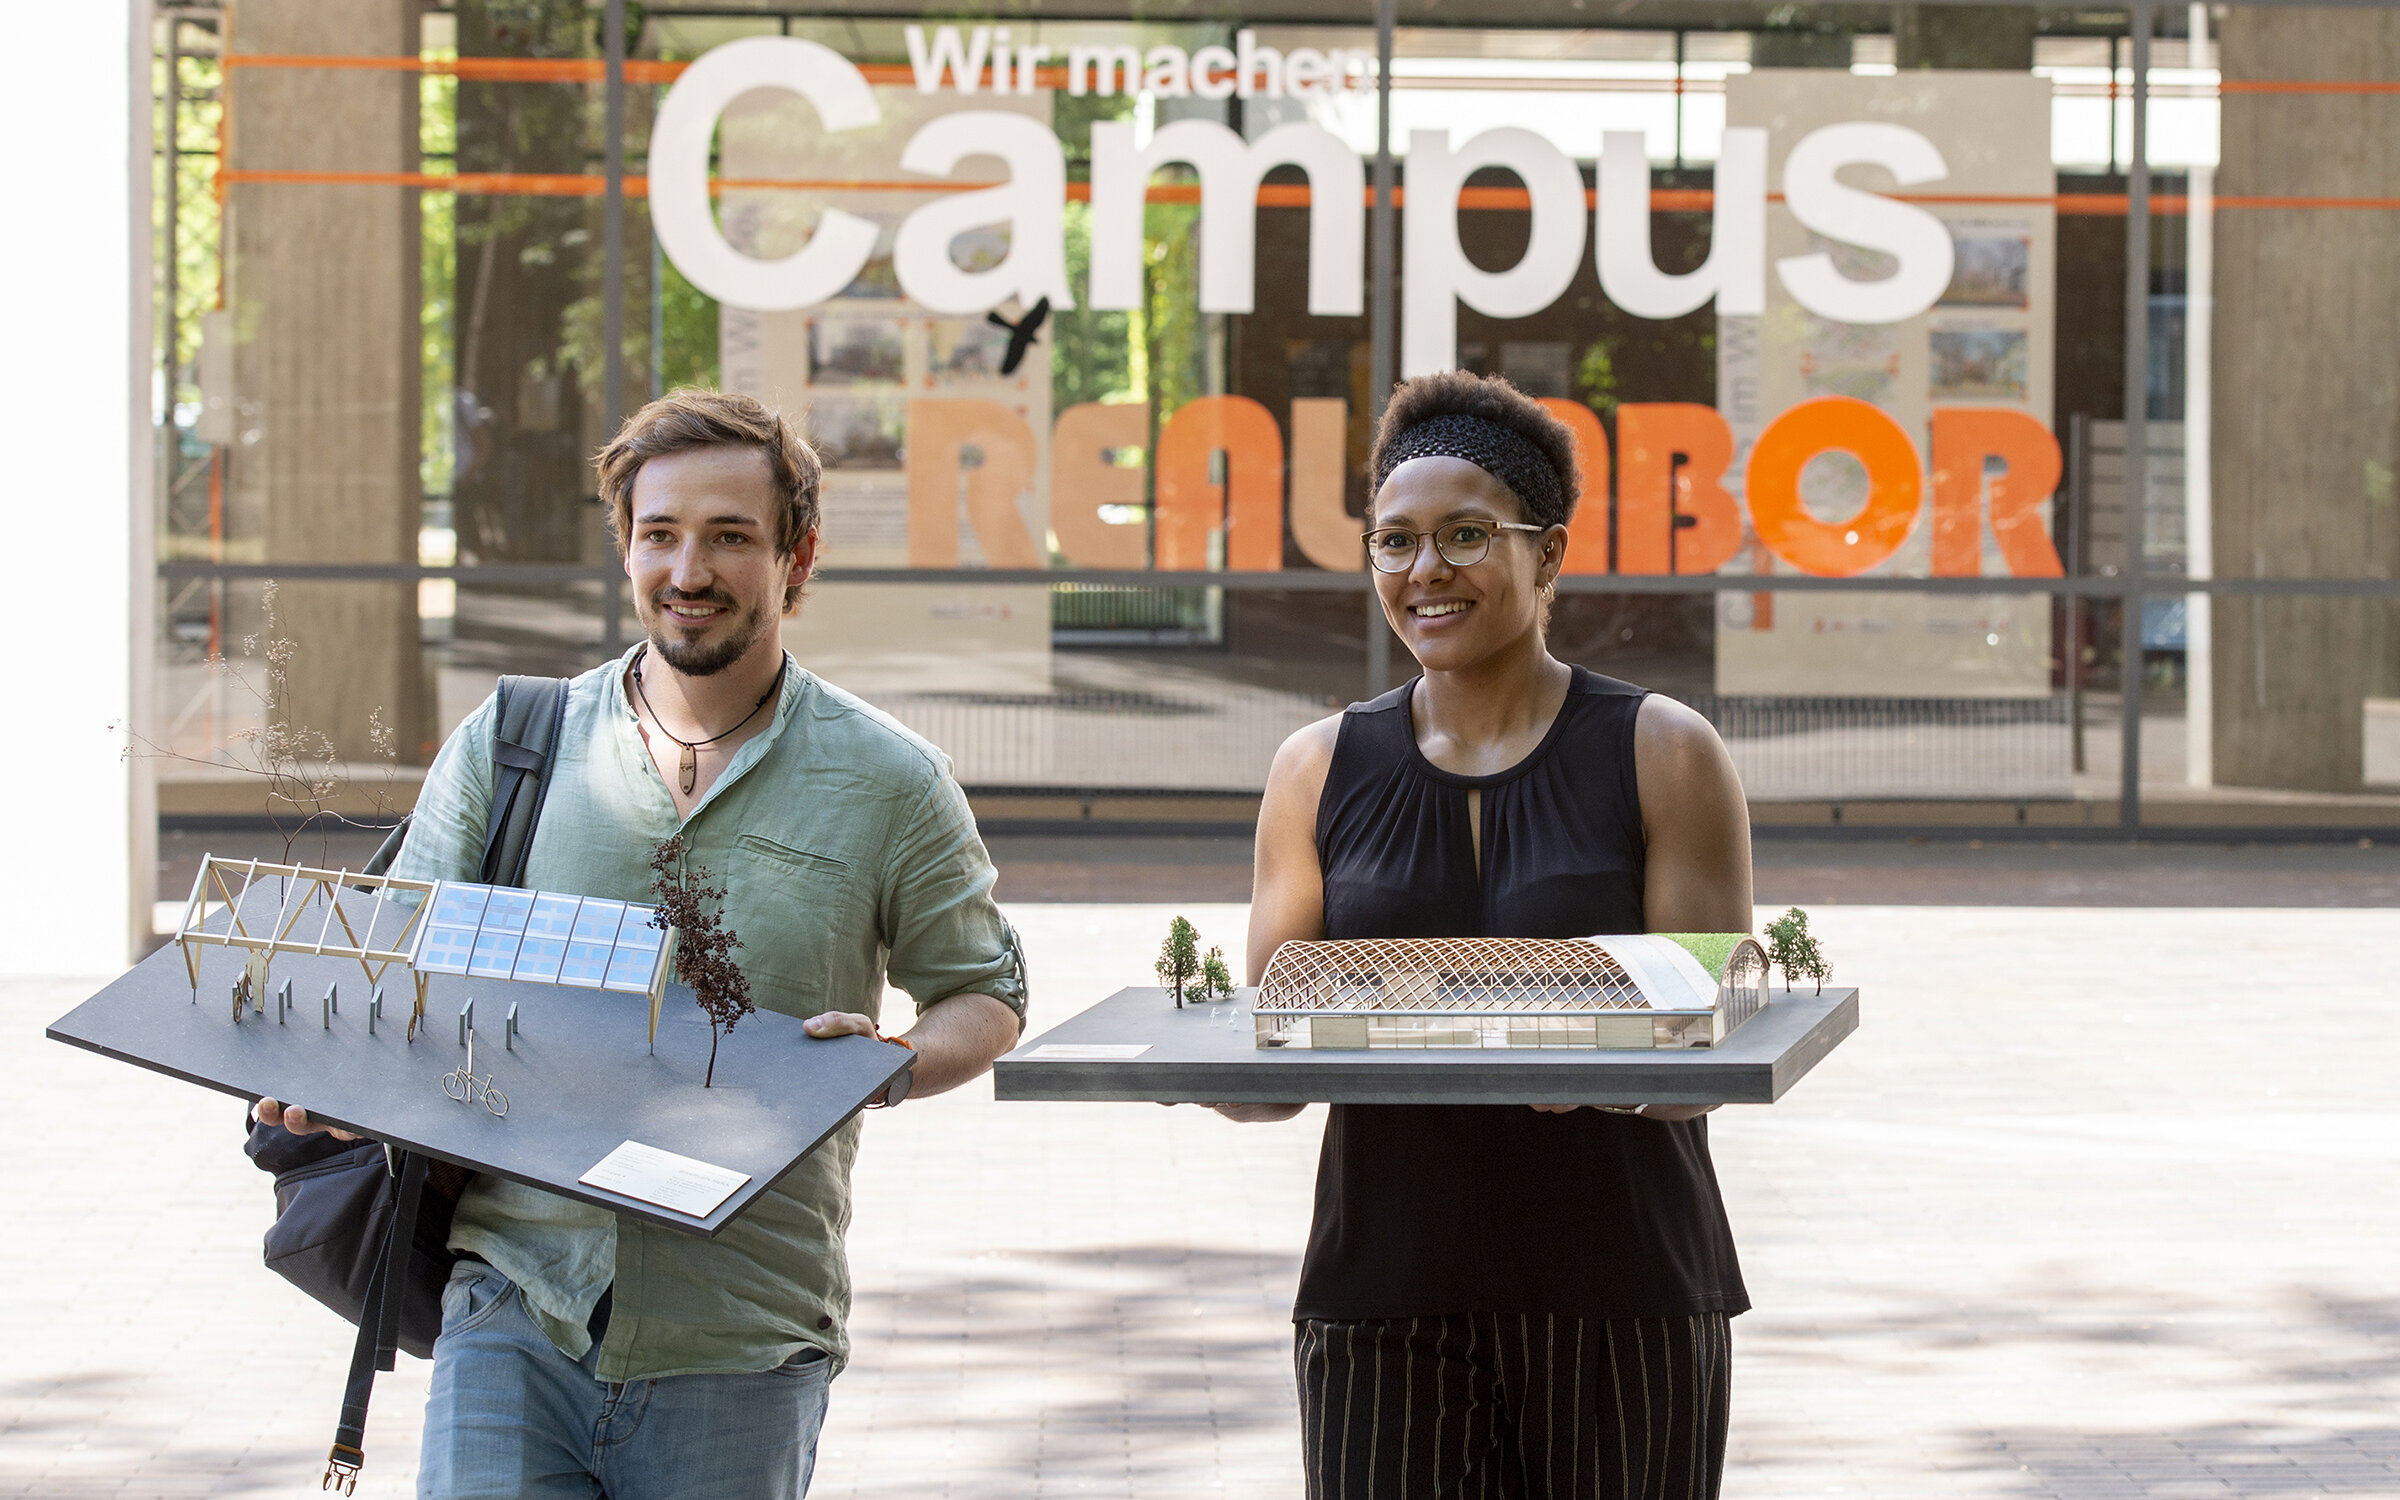 two students in front of the Civil Engineering building, carrying models of buildings